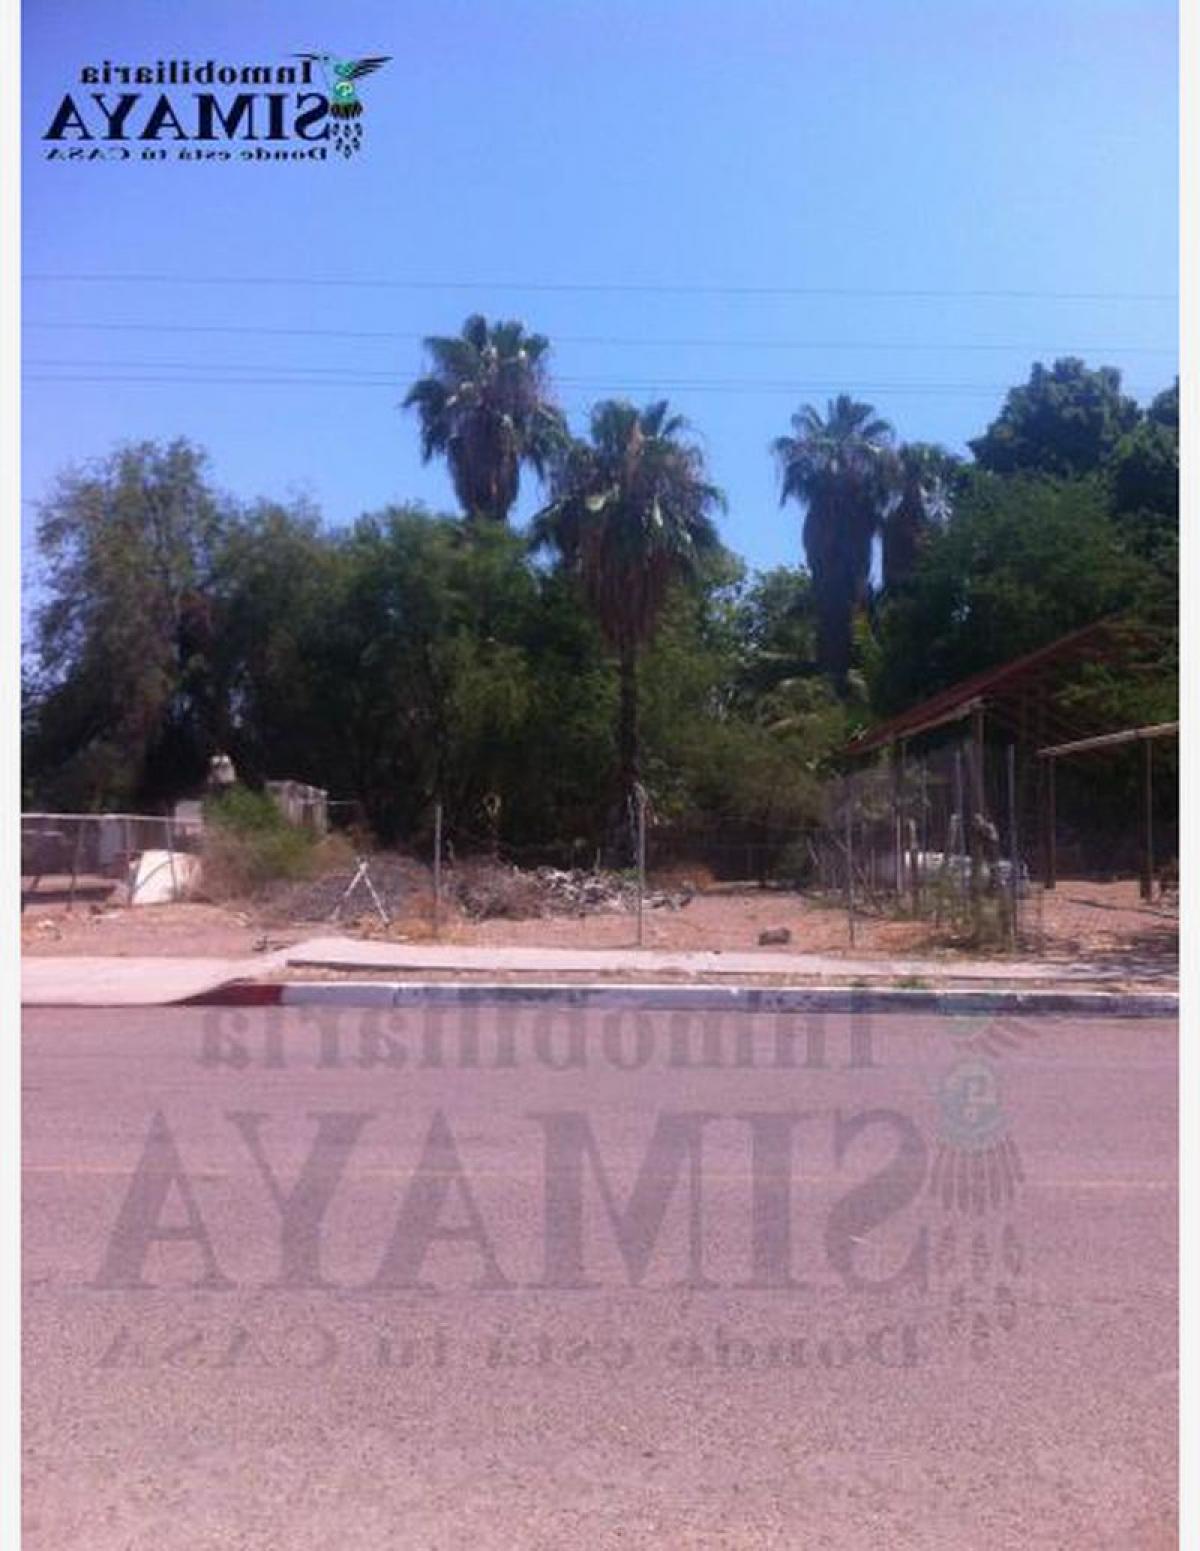 Picture of Residential Land For Sale in Loreto, Baja California Sur, Mexico